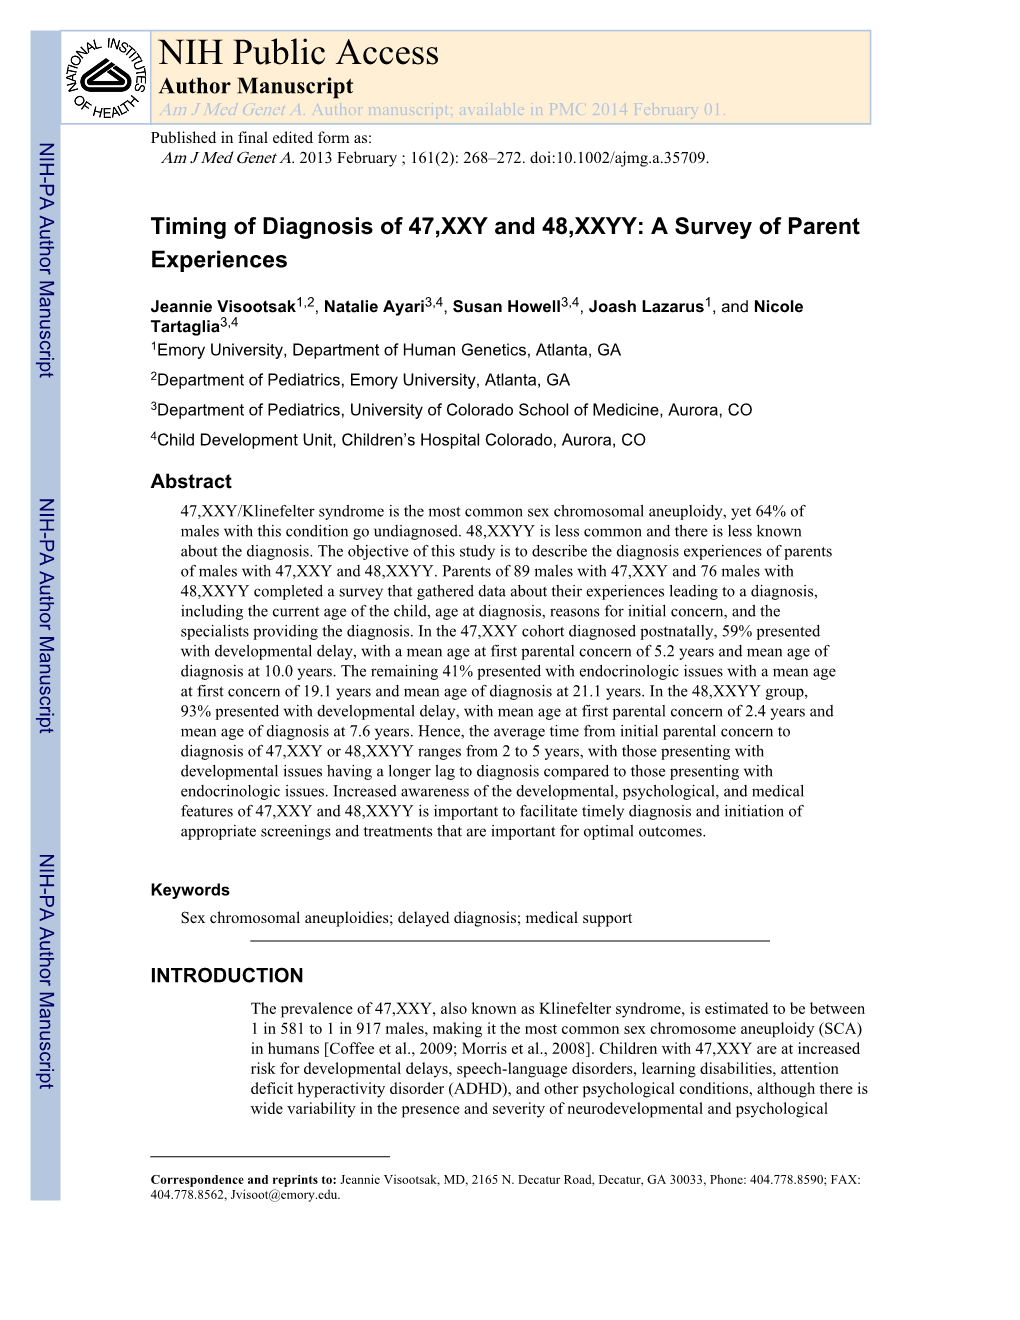 Timing of Diagnosis of 47,XXY and 48,XXYY: a Survey of Parent Experiences